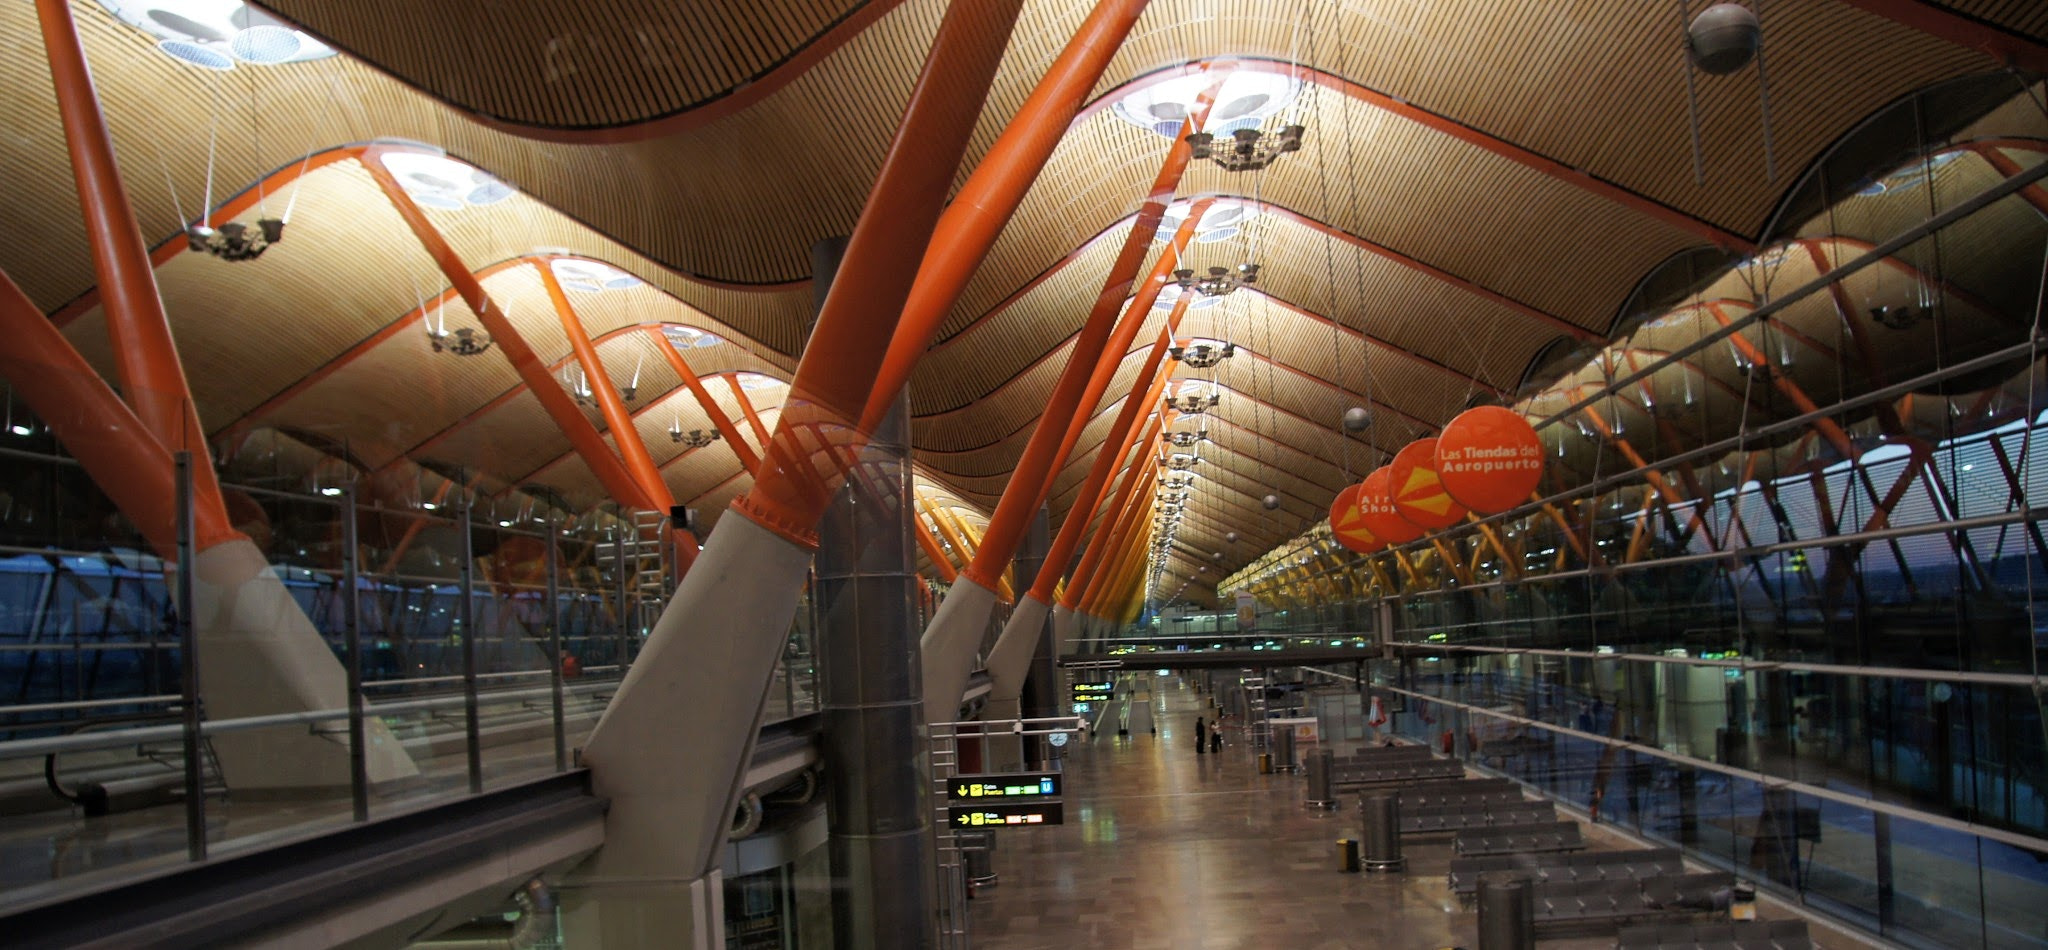 Sony DT 16-105mm F3.5-5.6 sample photo. Barajas airport photography